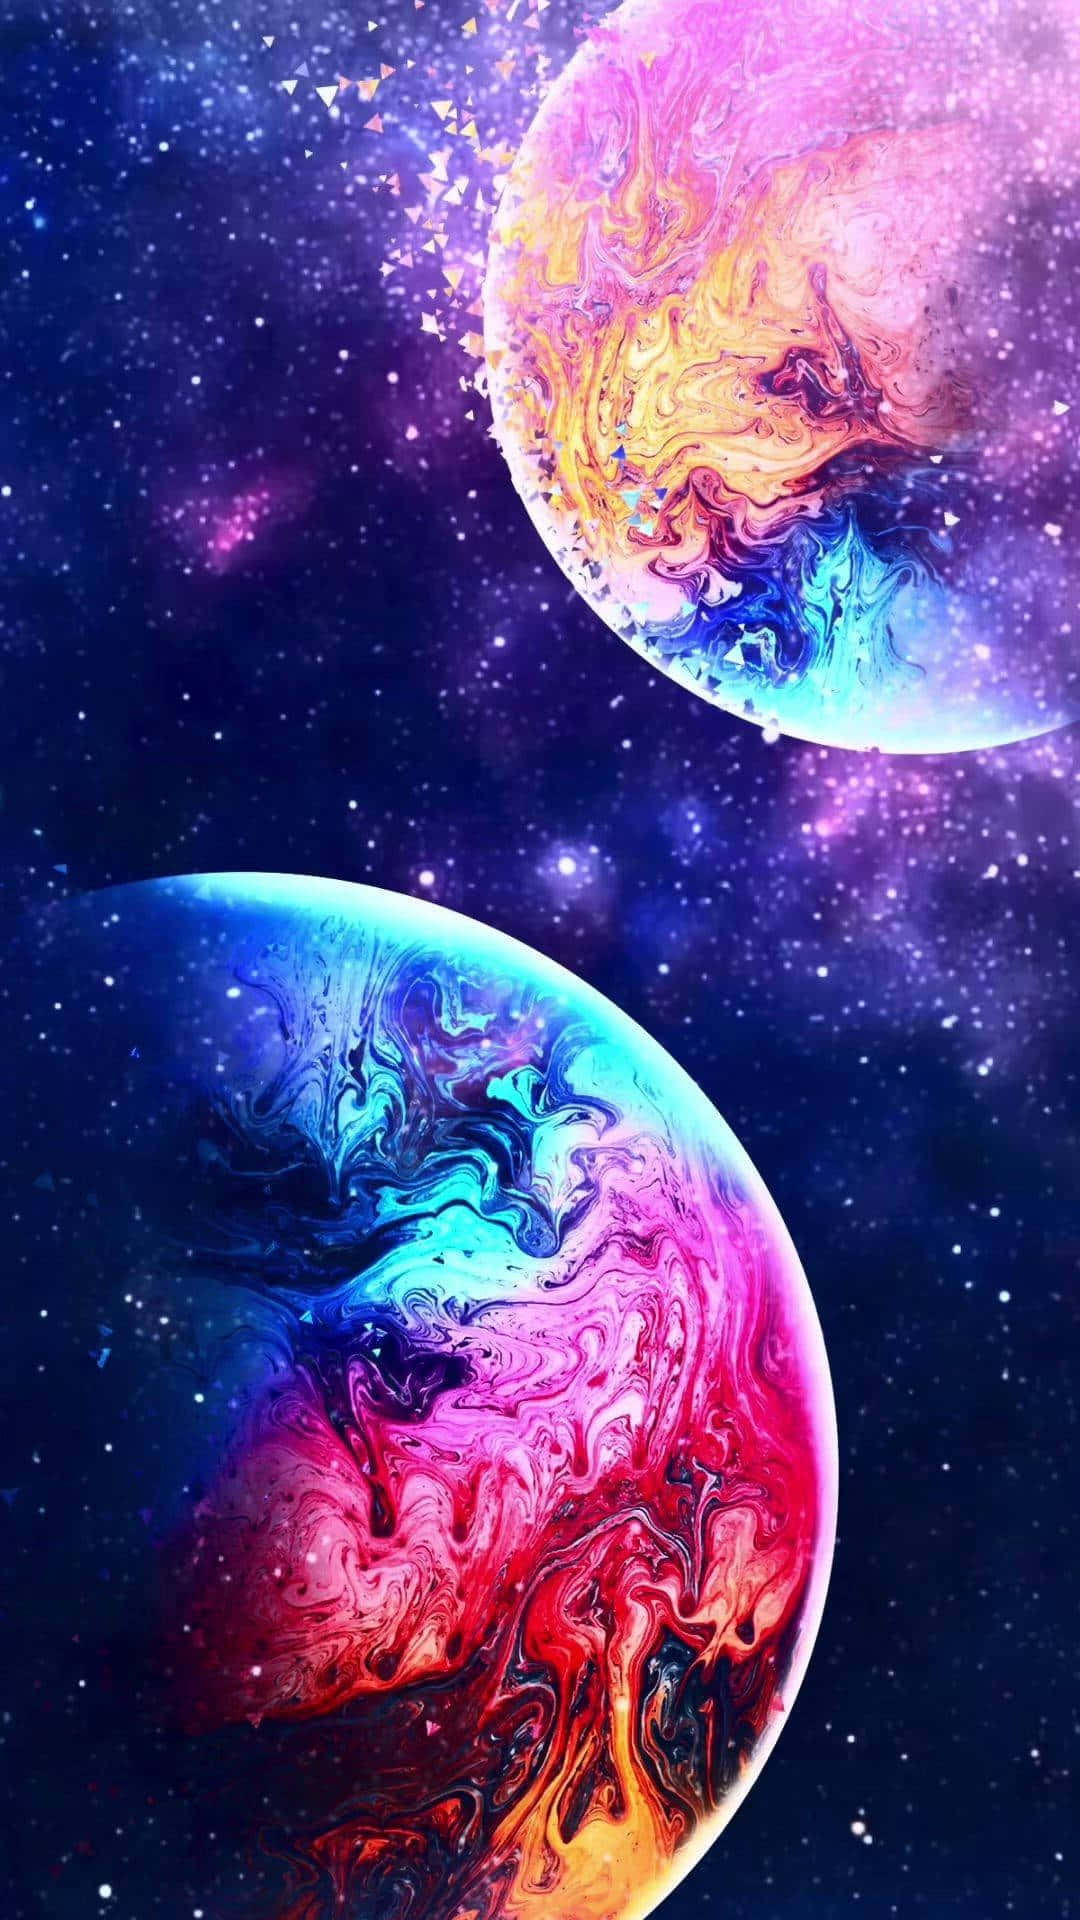 Girly Galaxy wallpapers Cute   Apps on Google Play